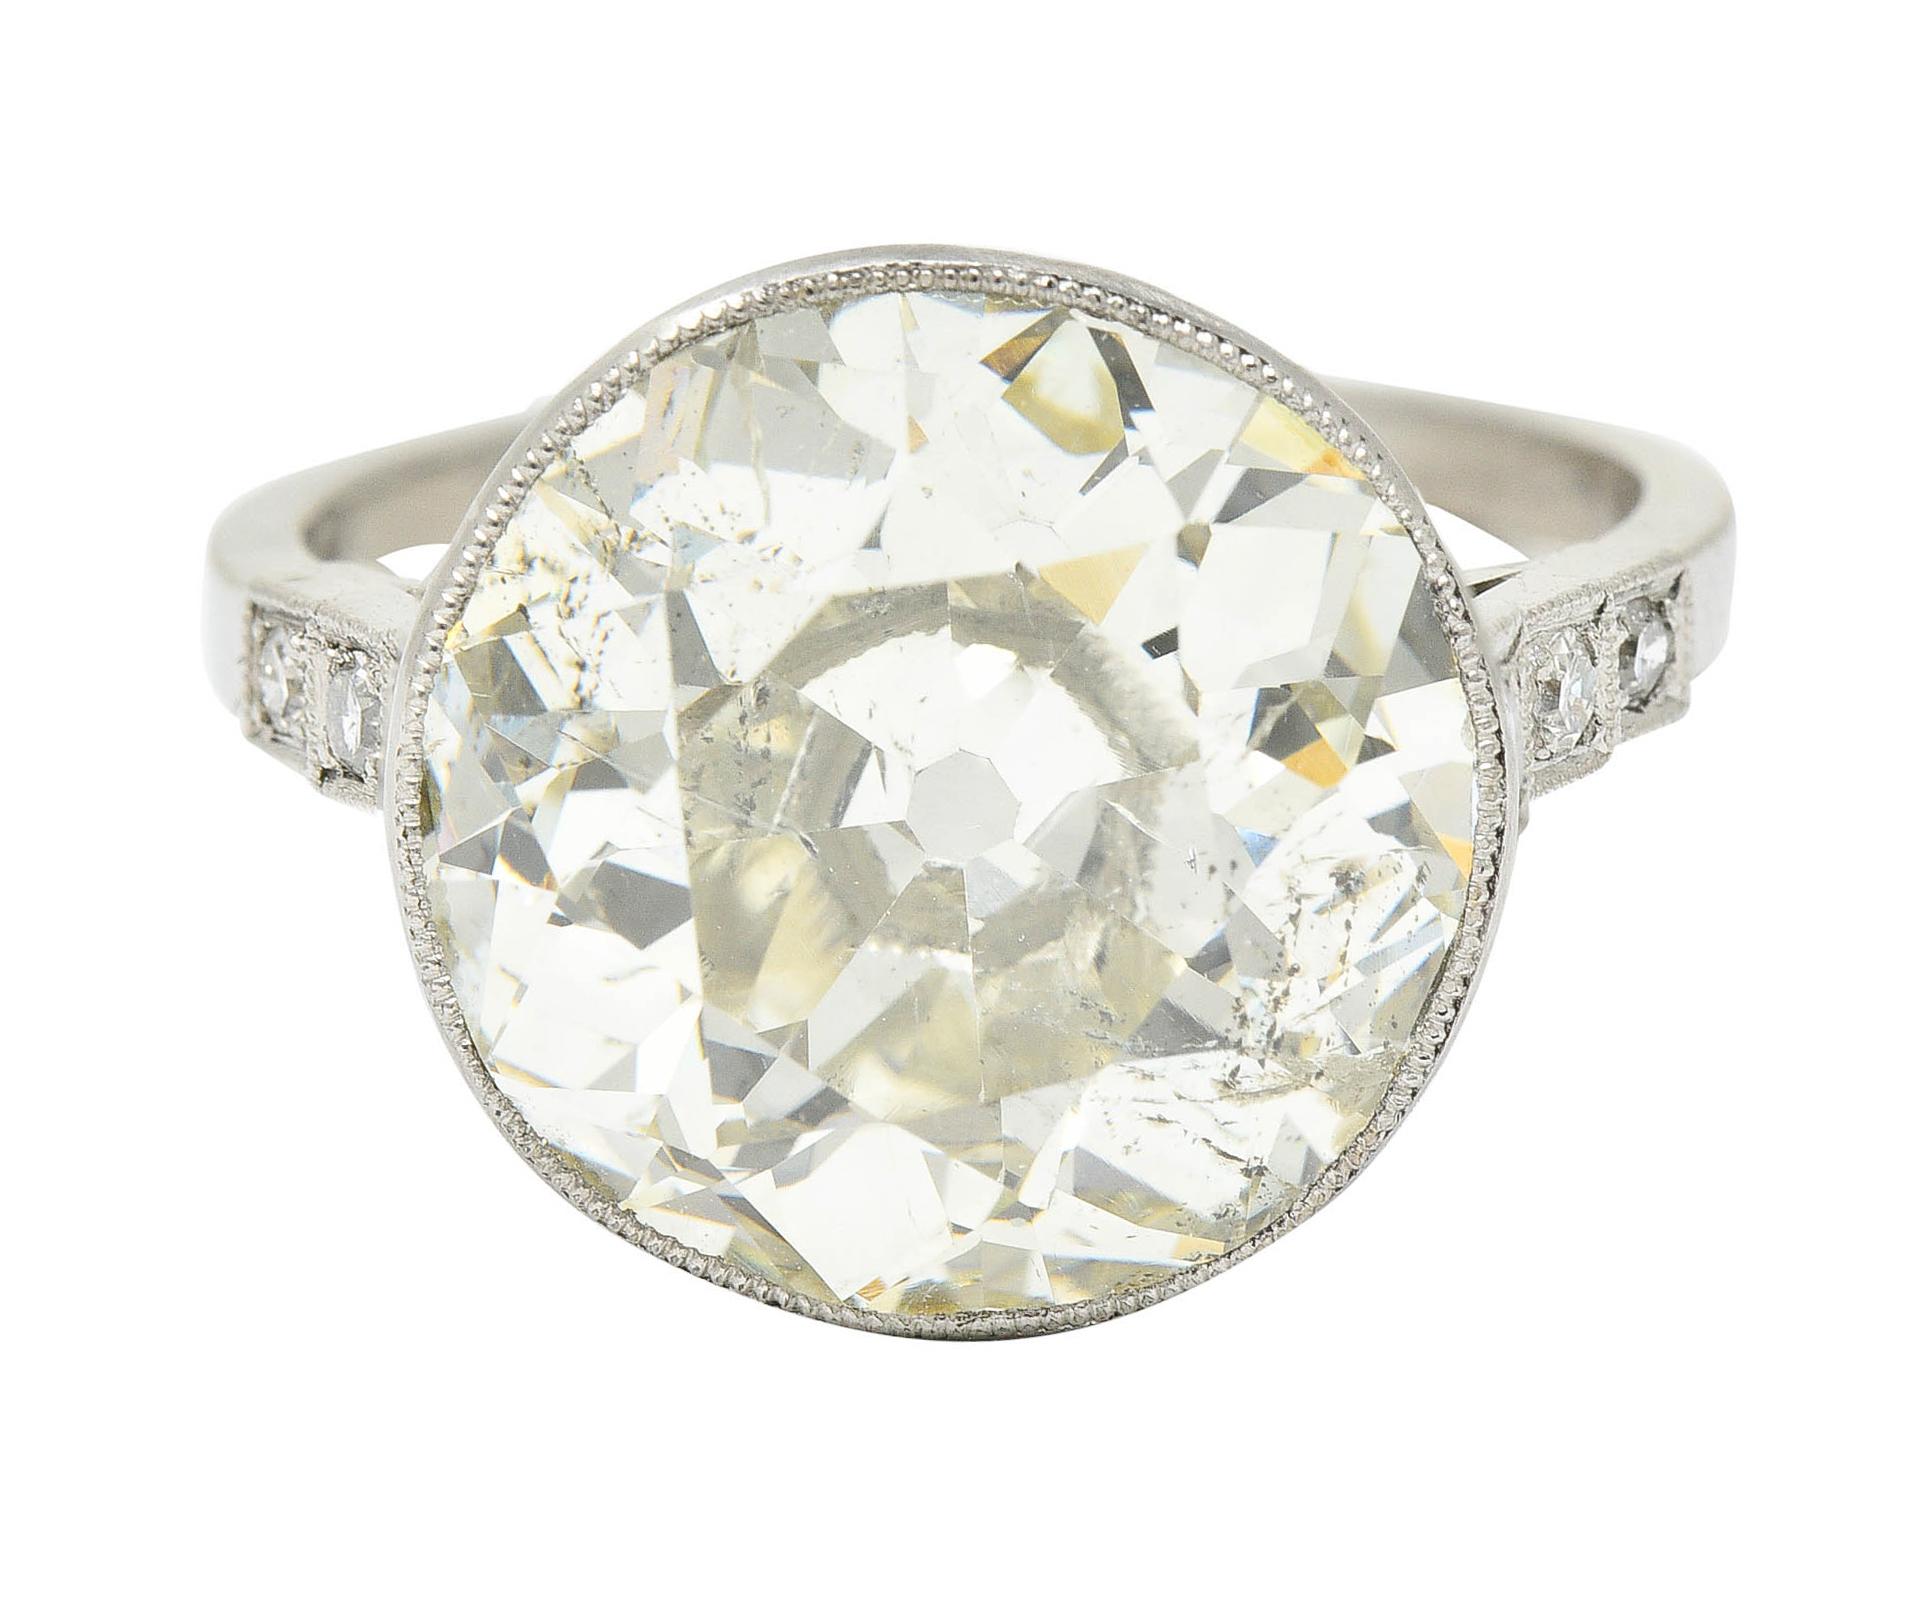 Centering an old European cut diamond weighing 7.06 carats - M color with SI2 clarity

Bezel set in a milgrain surround and flanked by stepped cathedral shoulders

Accented by single cut diamonds weighing in total approximately 0.15 carat - H/I